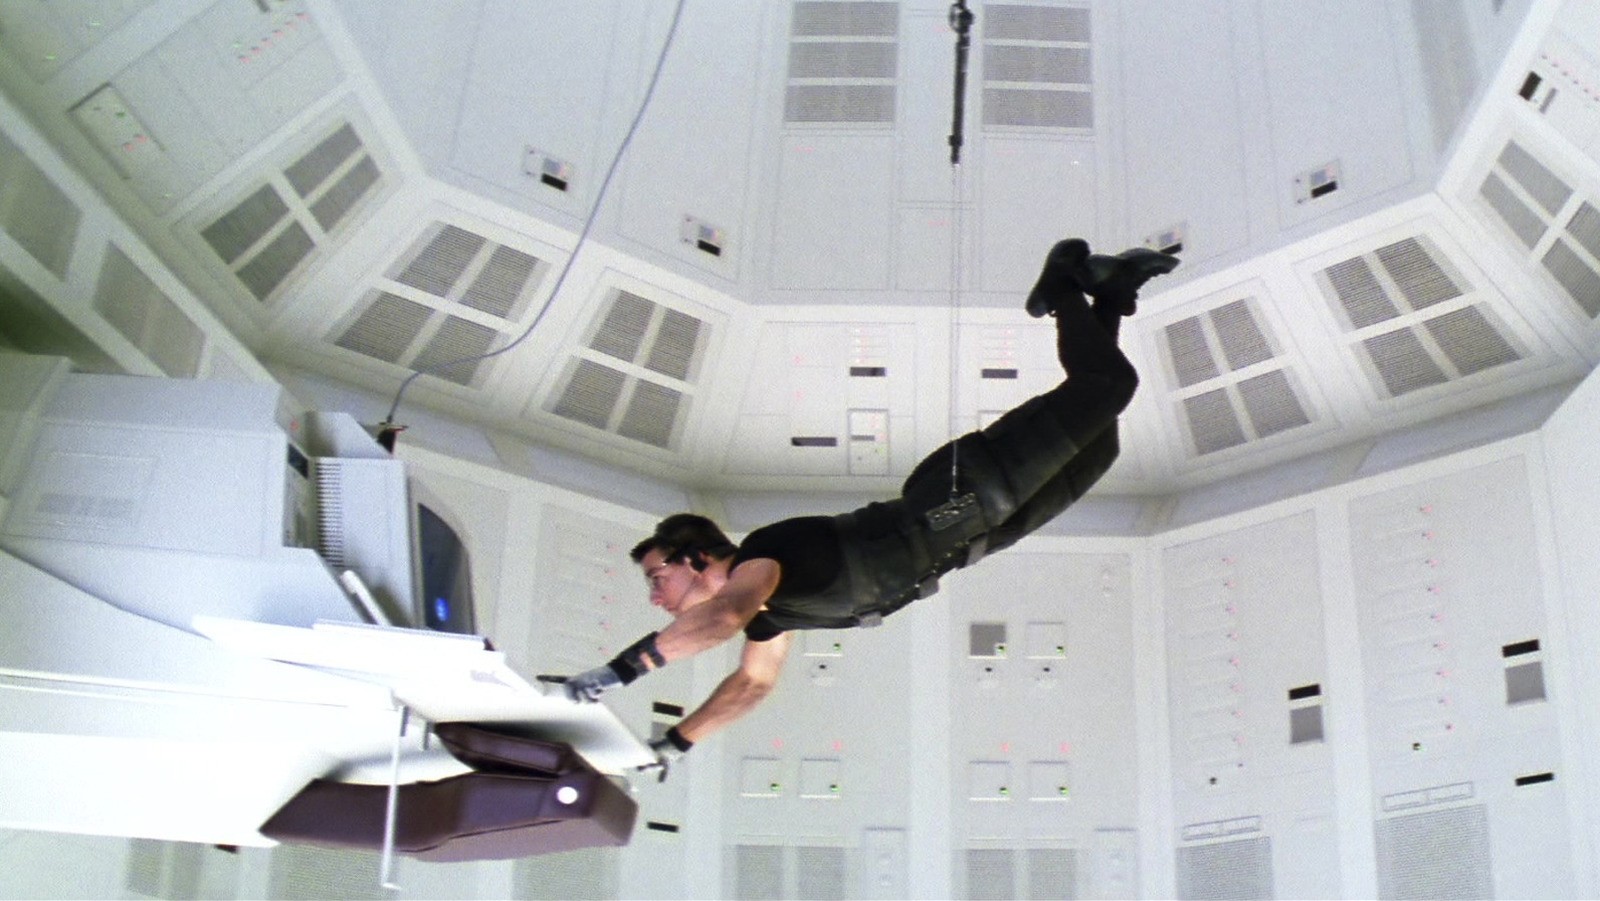 Tom Cruise in the heist scene in mission: impossible